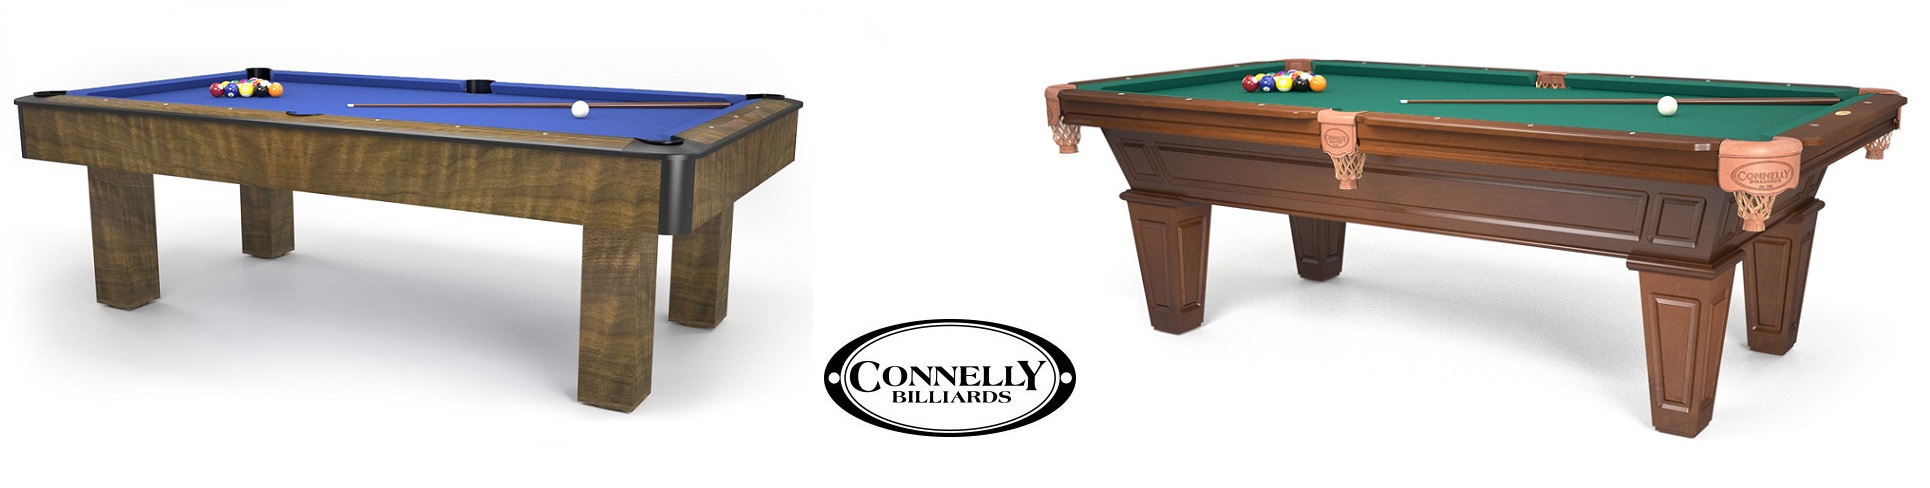 Connelly Billiards –  Pool Tables